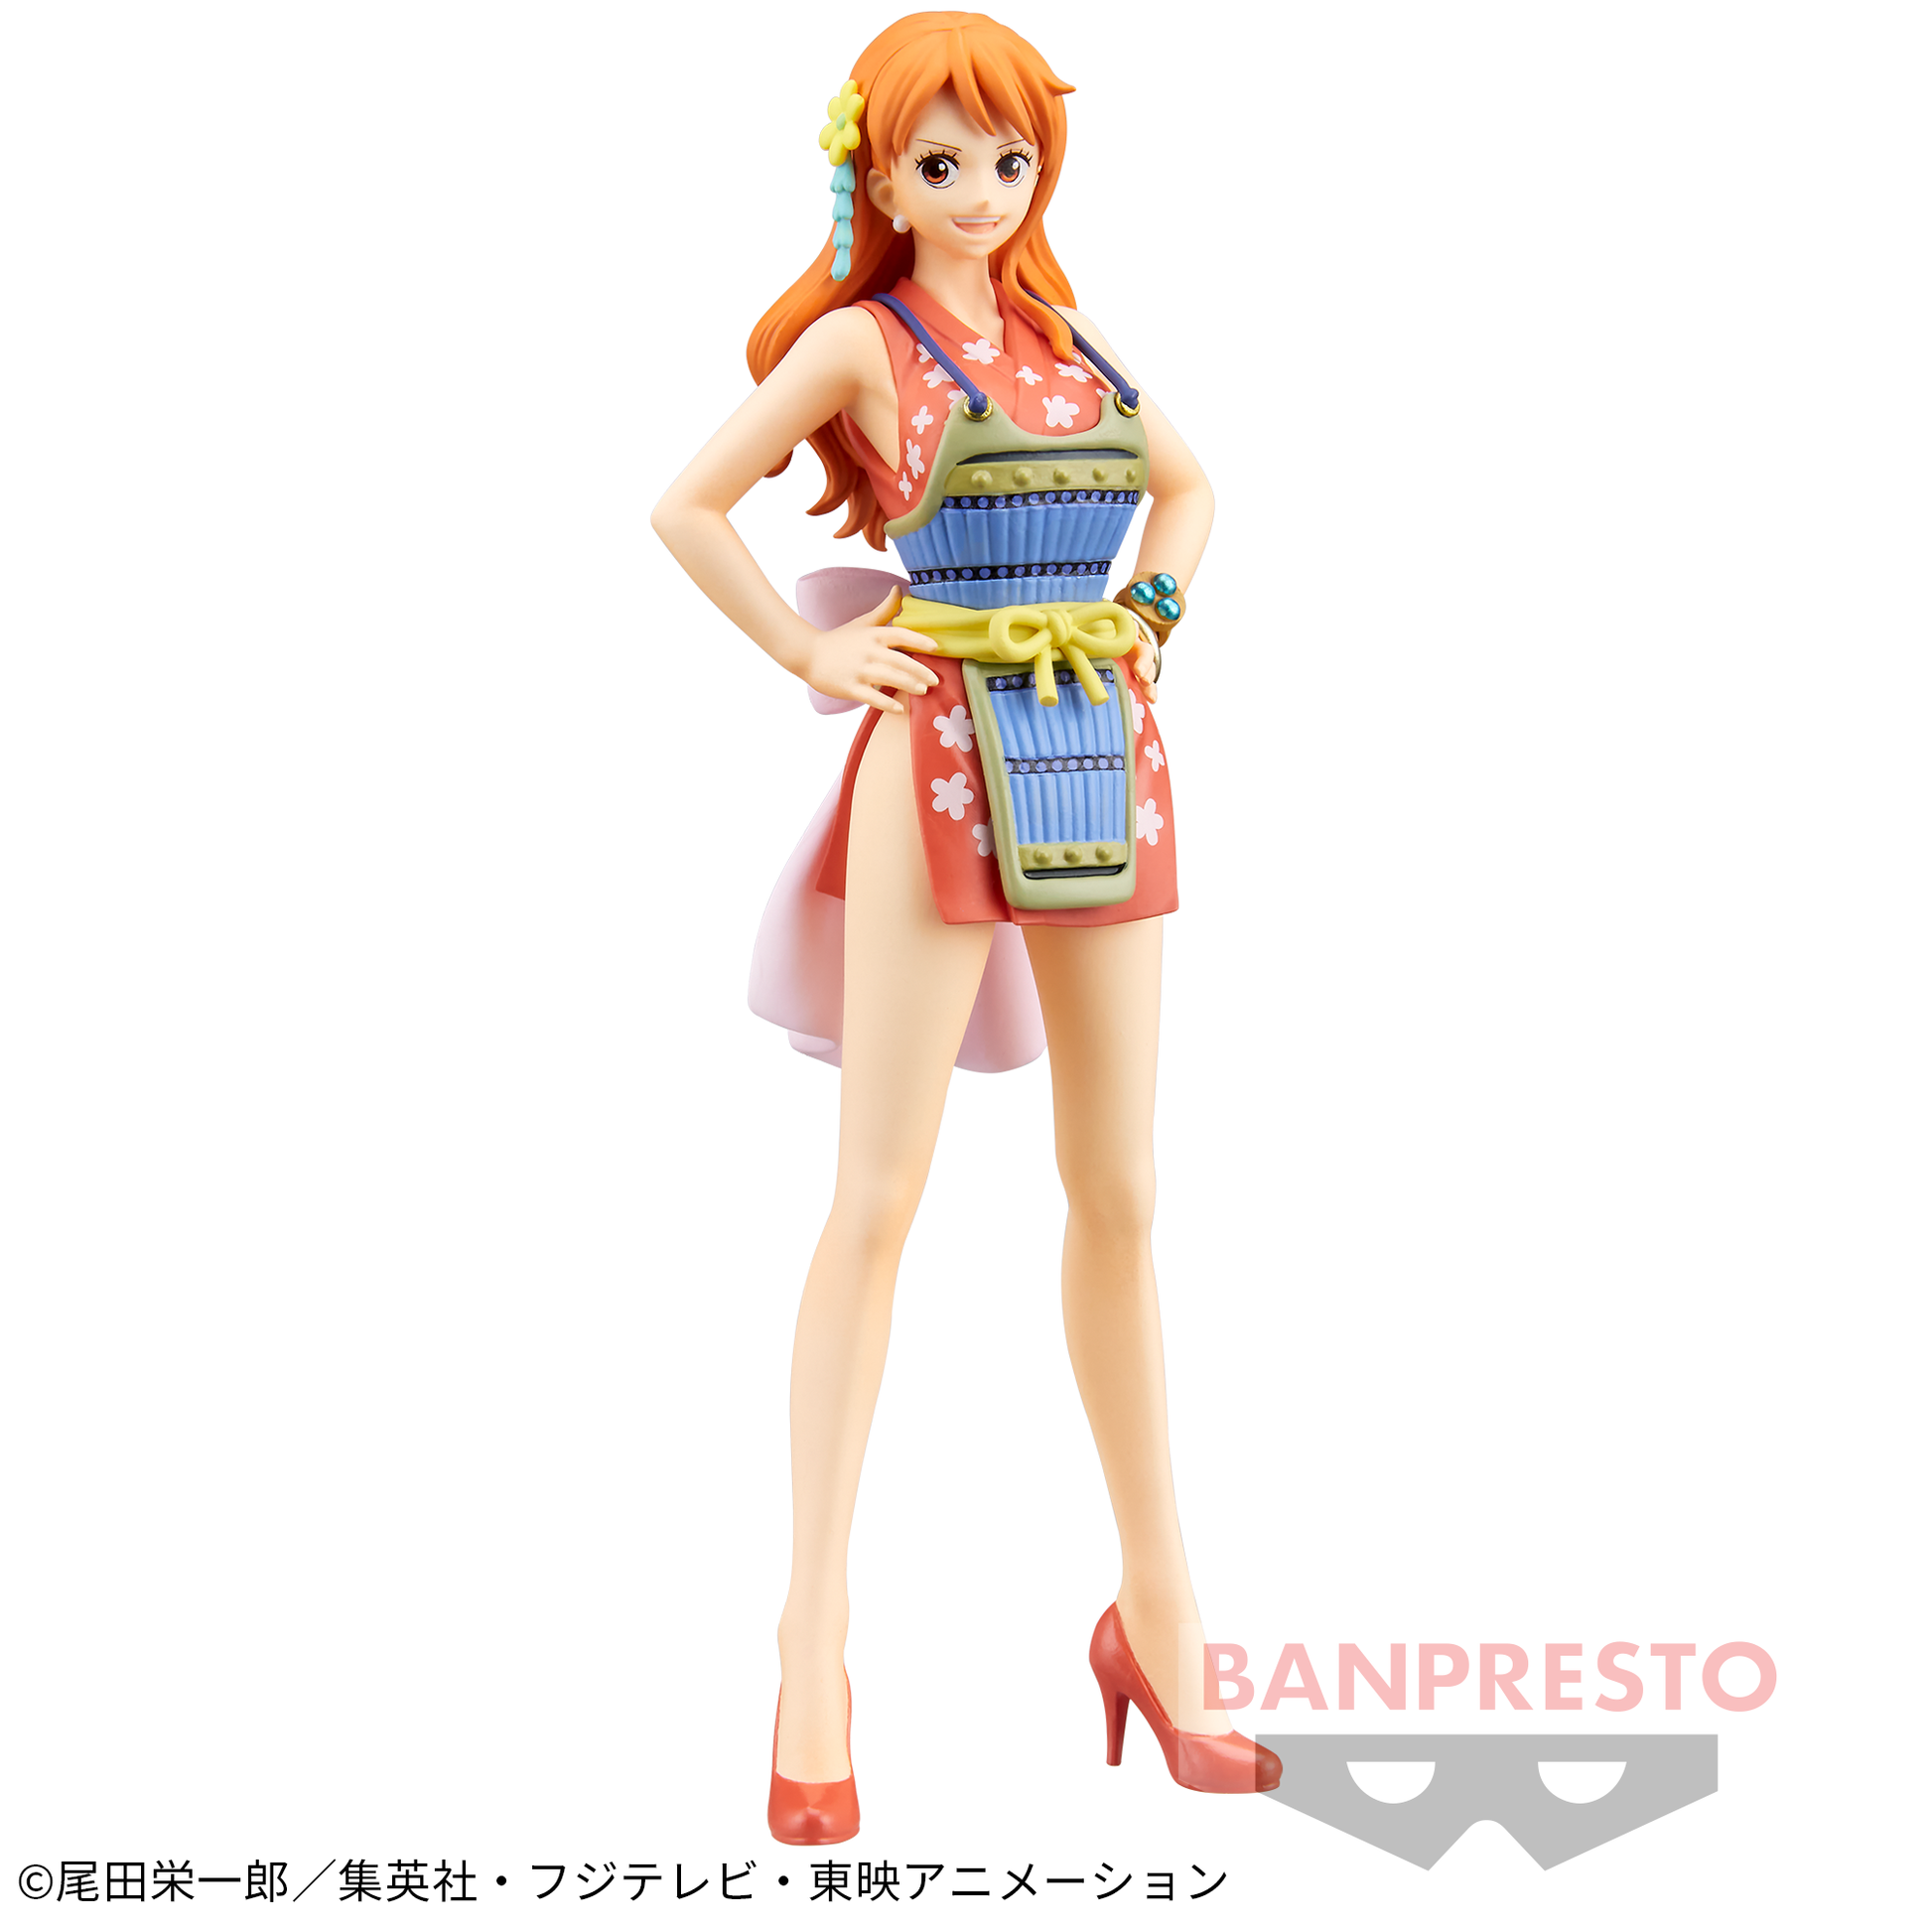 One Piece DXF The Grandline Lady Wano Vol.7 Nami Figure for Sale